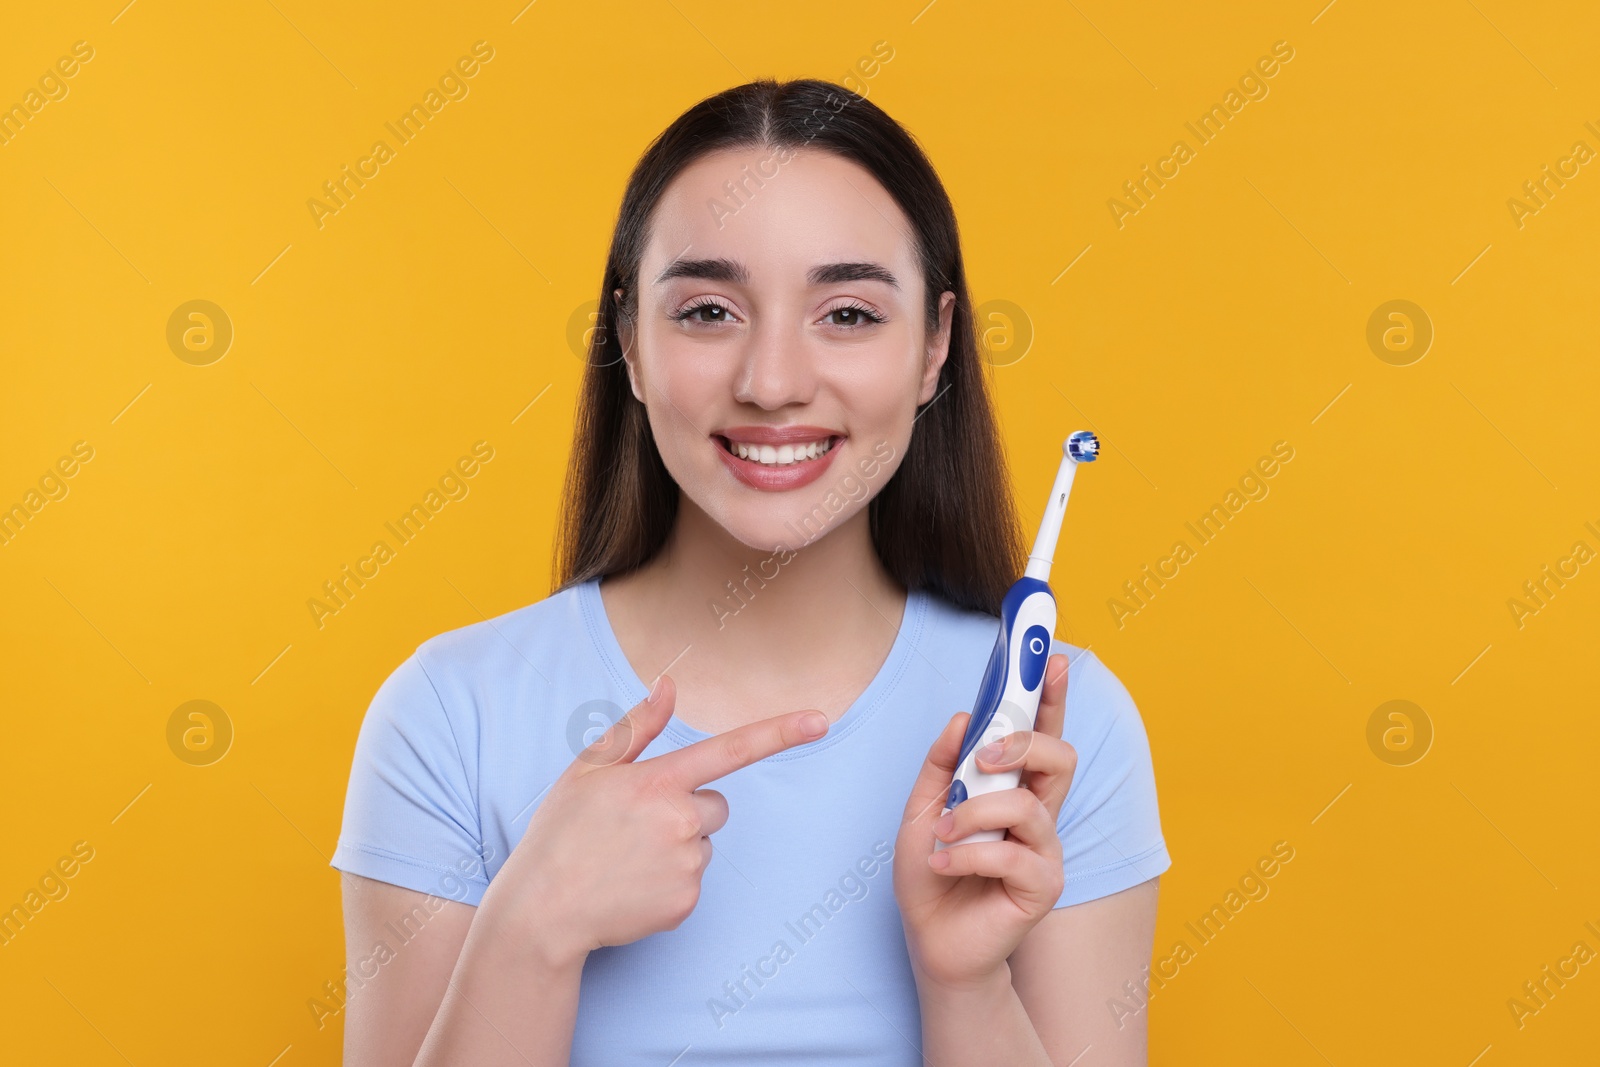 Photo of Happy young woman holding electric toothbrush on yellow background